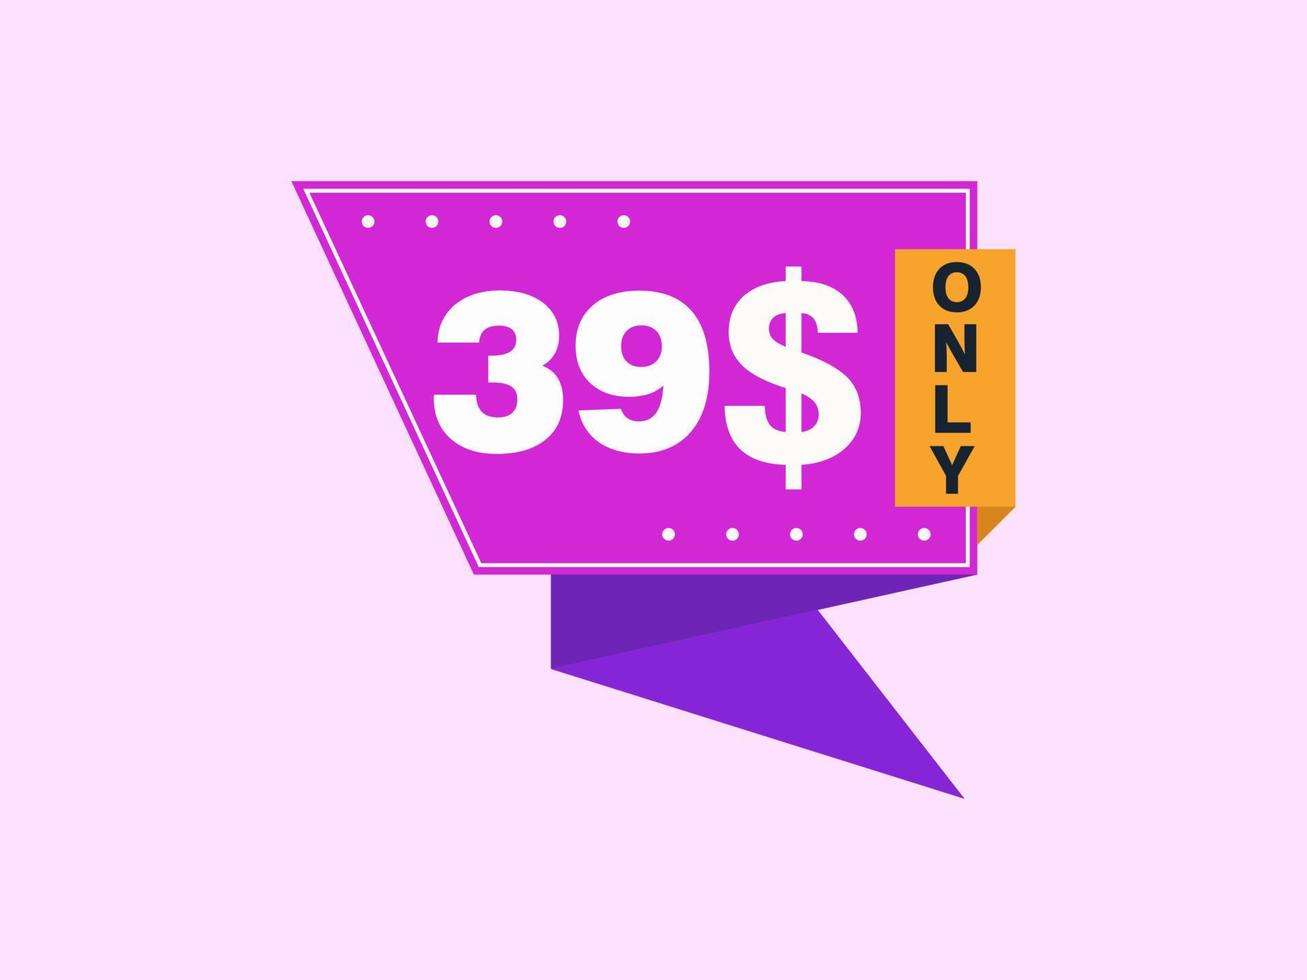 39 Dollar Only Coupon sign or Label or discount voucher Money Saving label, with coupon vector illustration summer offer ends weekend holiday